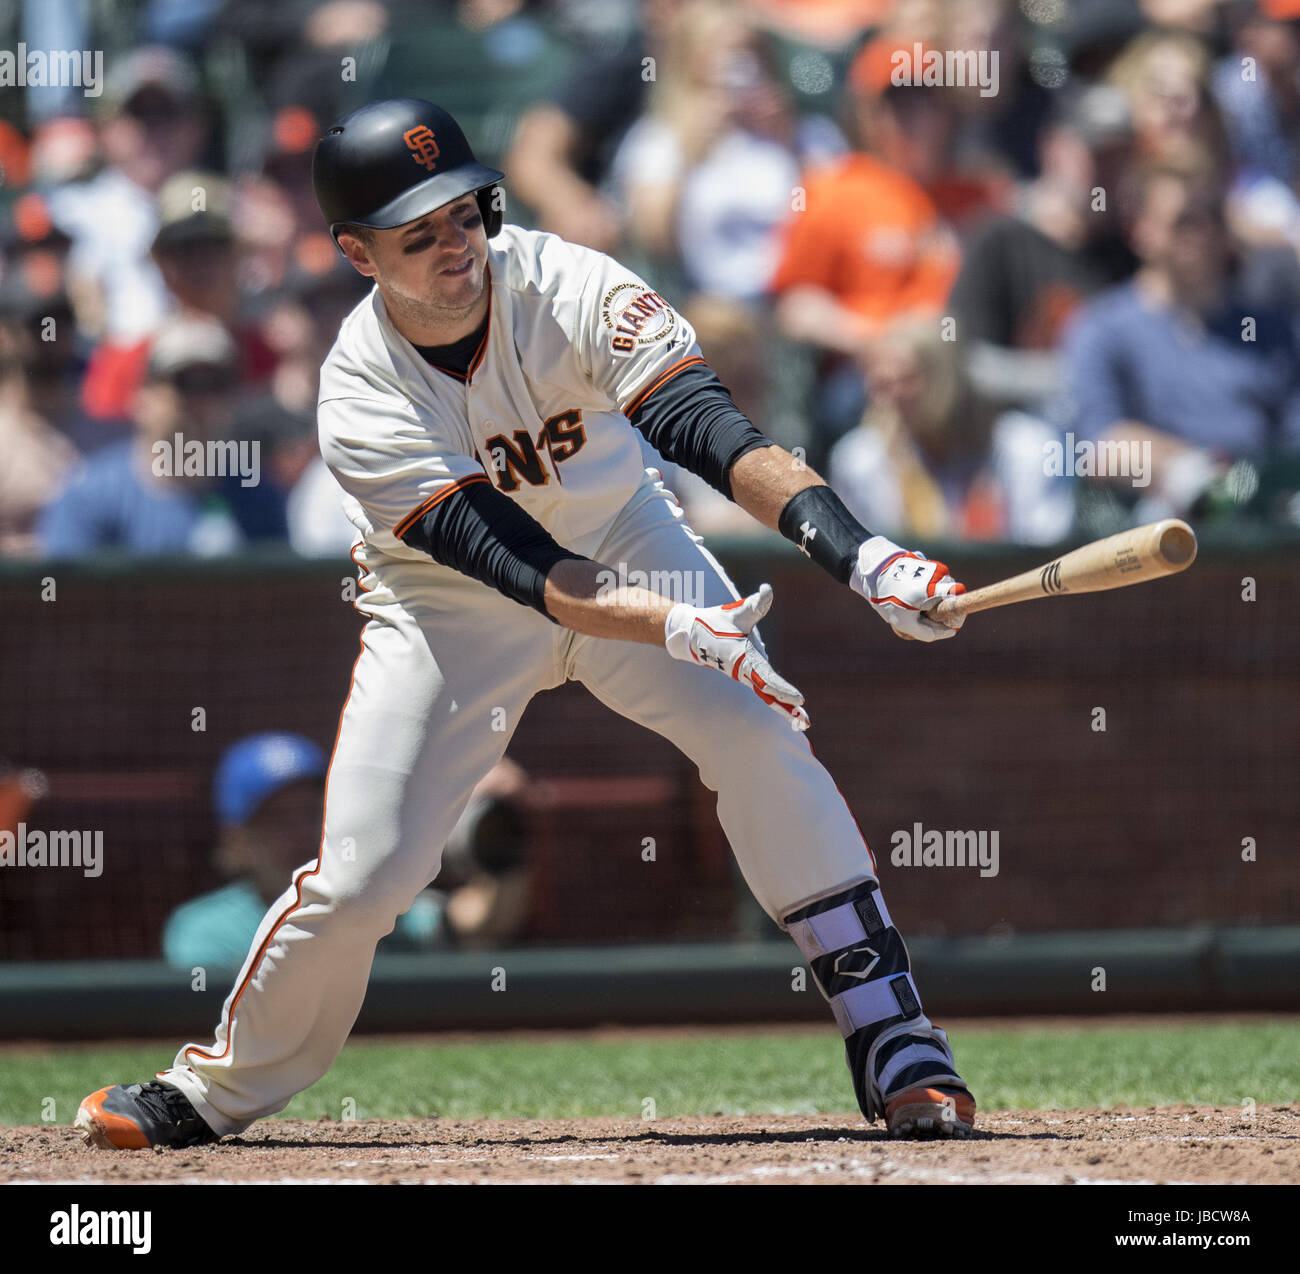 San Francisco, California, USA. 10th June, 2017. San Francisco Giants catcher Buster Posey (28) making a sacrifice grounder to let third baseman Eduardo Nunez (10) score their second run, during a MLB baseball game between the Minnesota Twins and the San Francisco Giants on Autism Awareness Day at AT&T Park in San Francisco, California. Valerie Shoaps/CSM/Alamy Live News Stock Photo